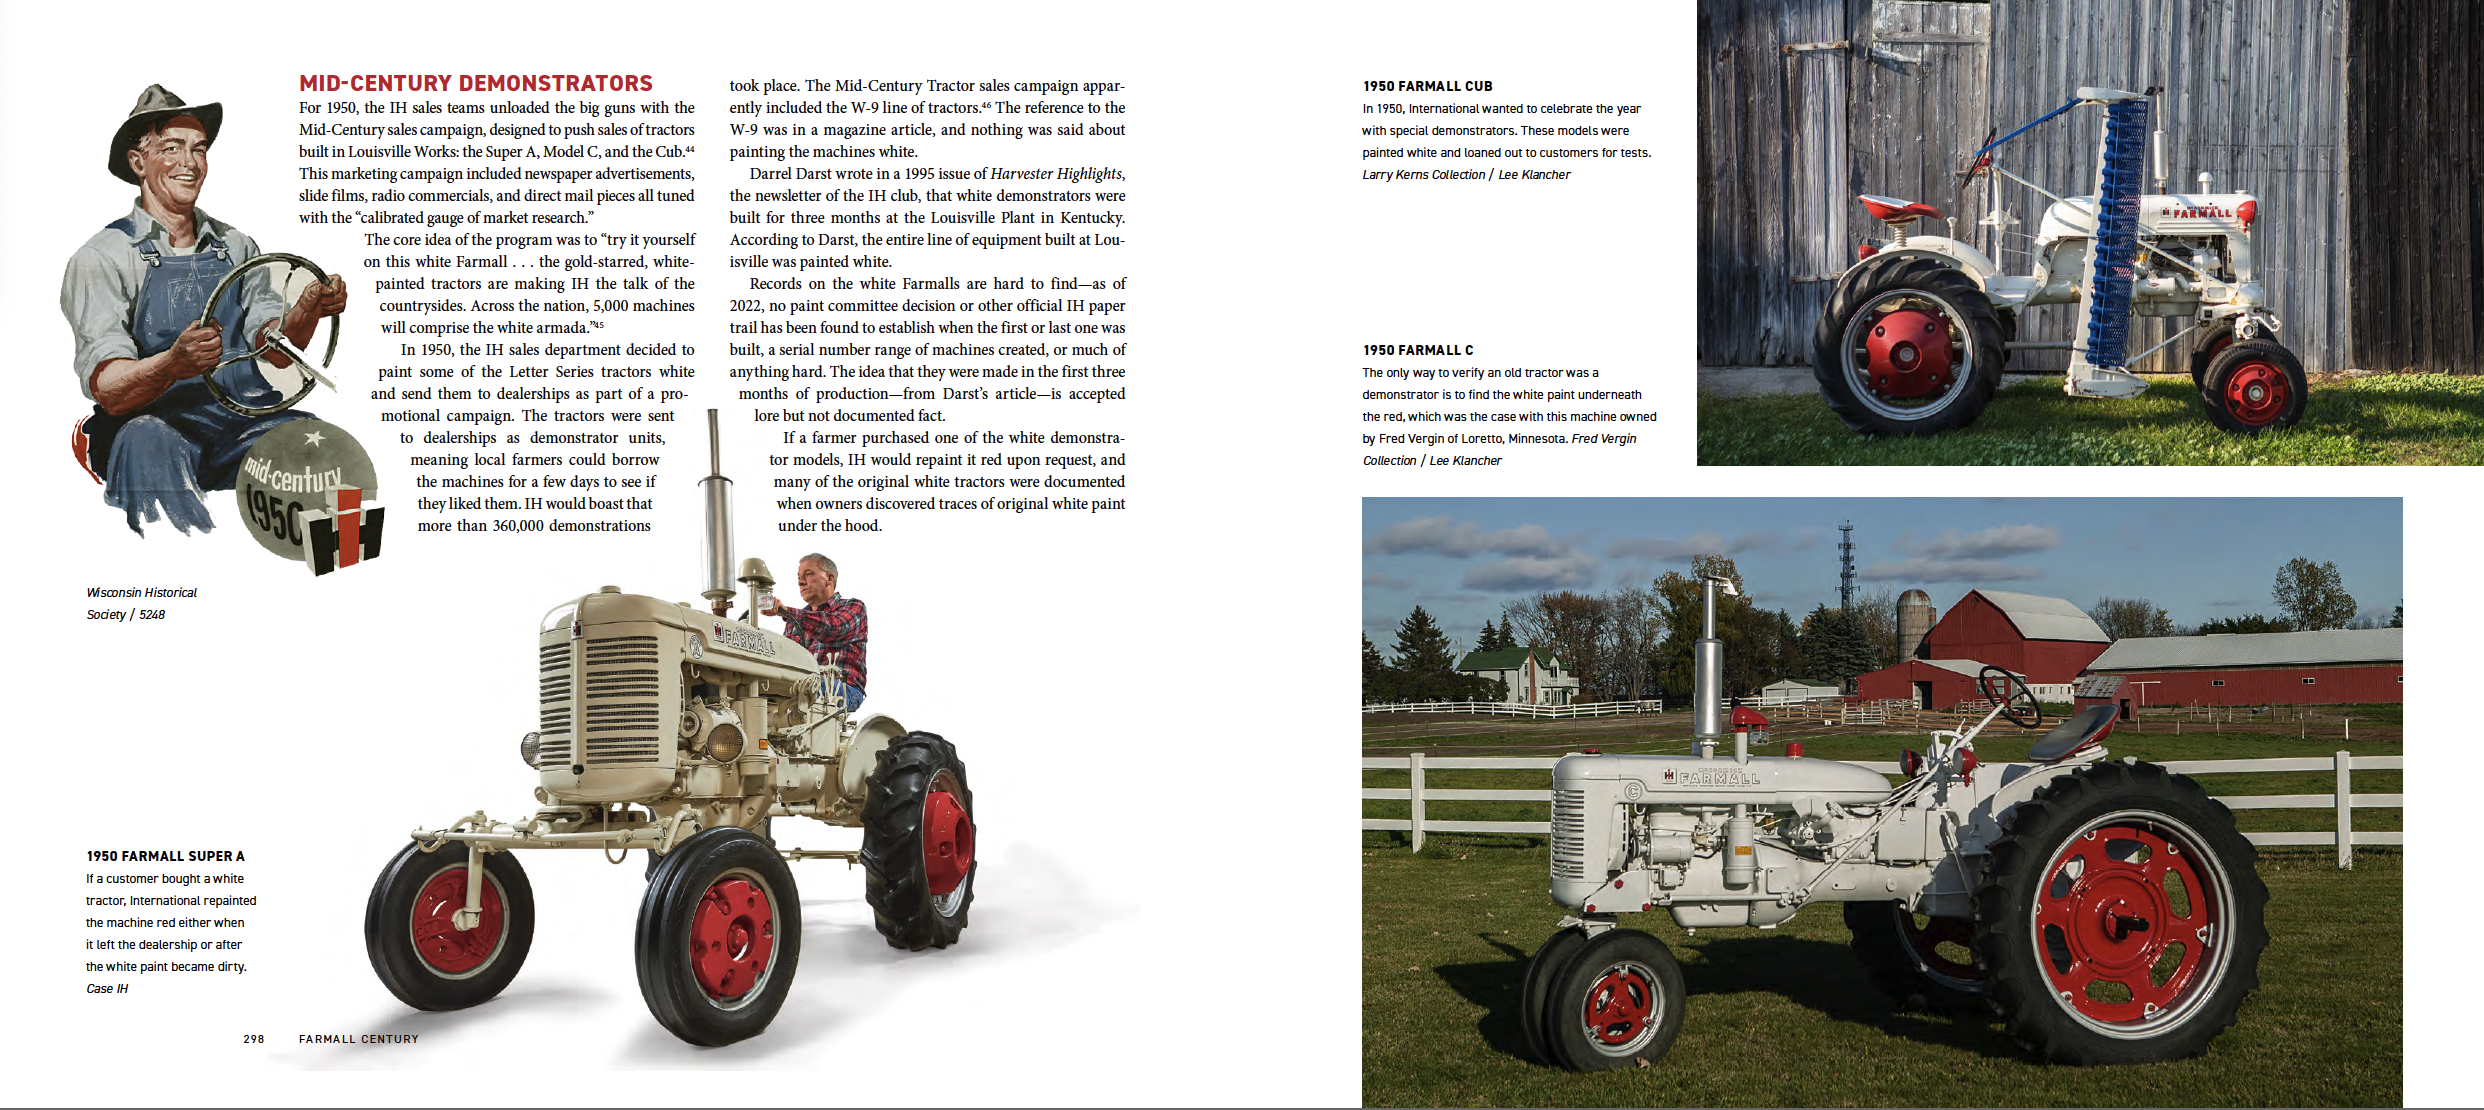 Page from the book showing Farmall Letter Series tractors painted white